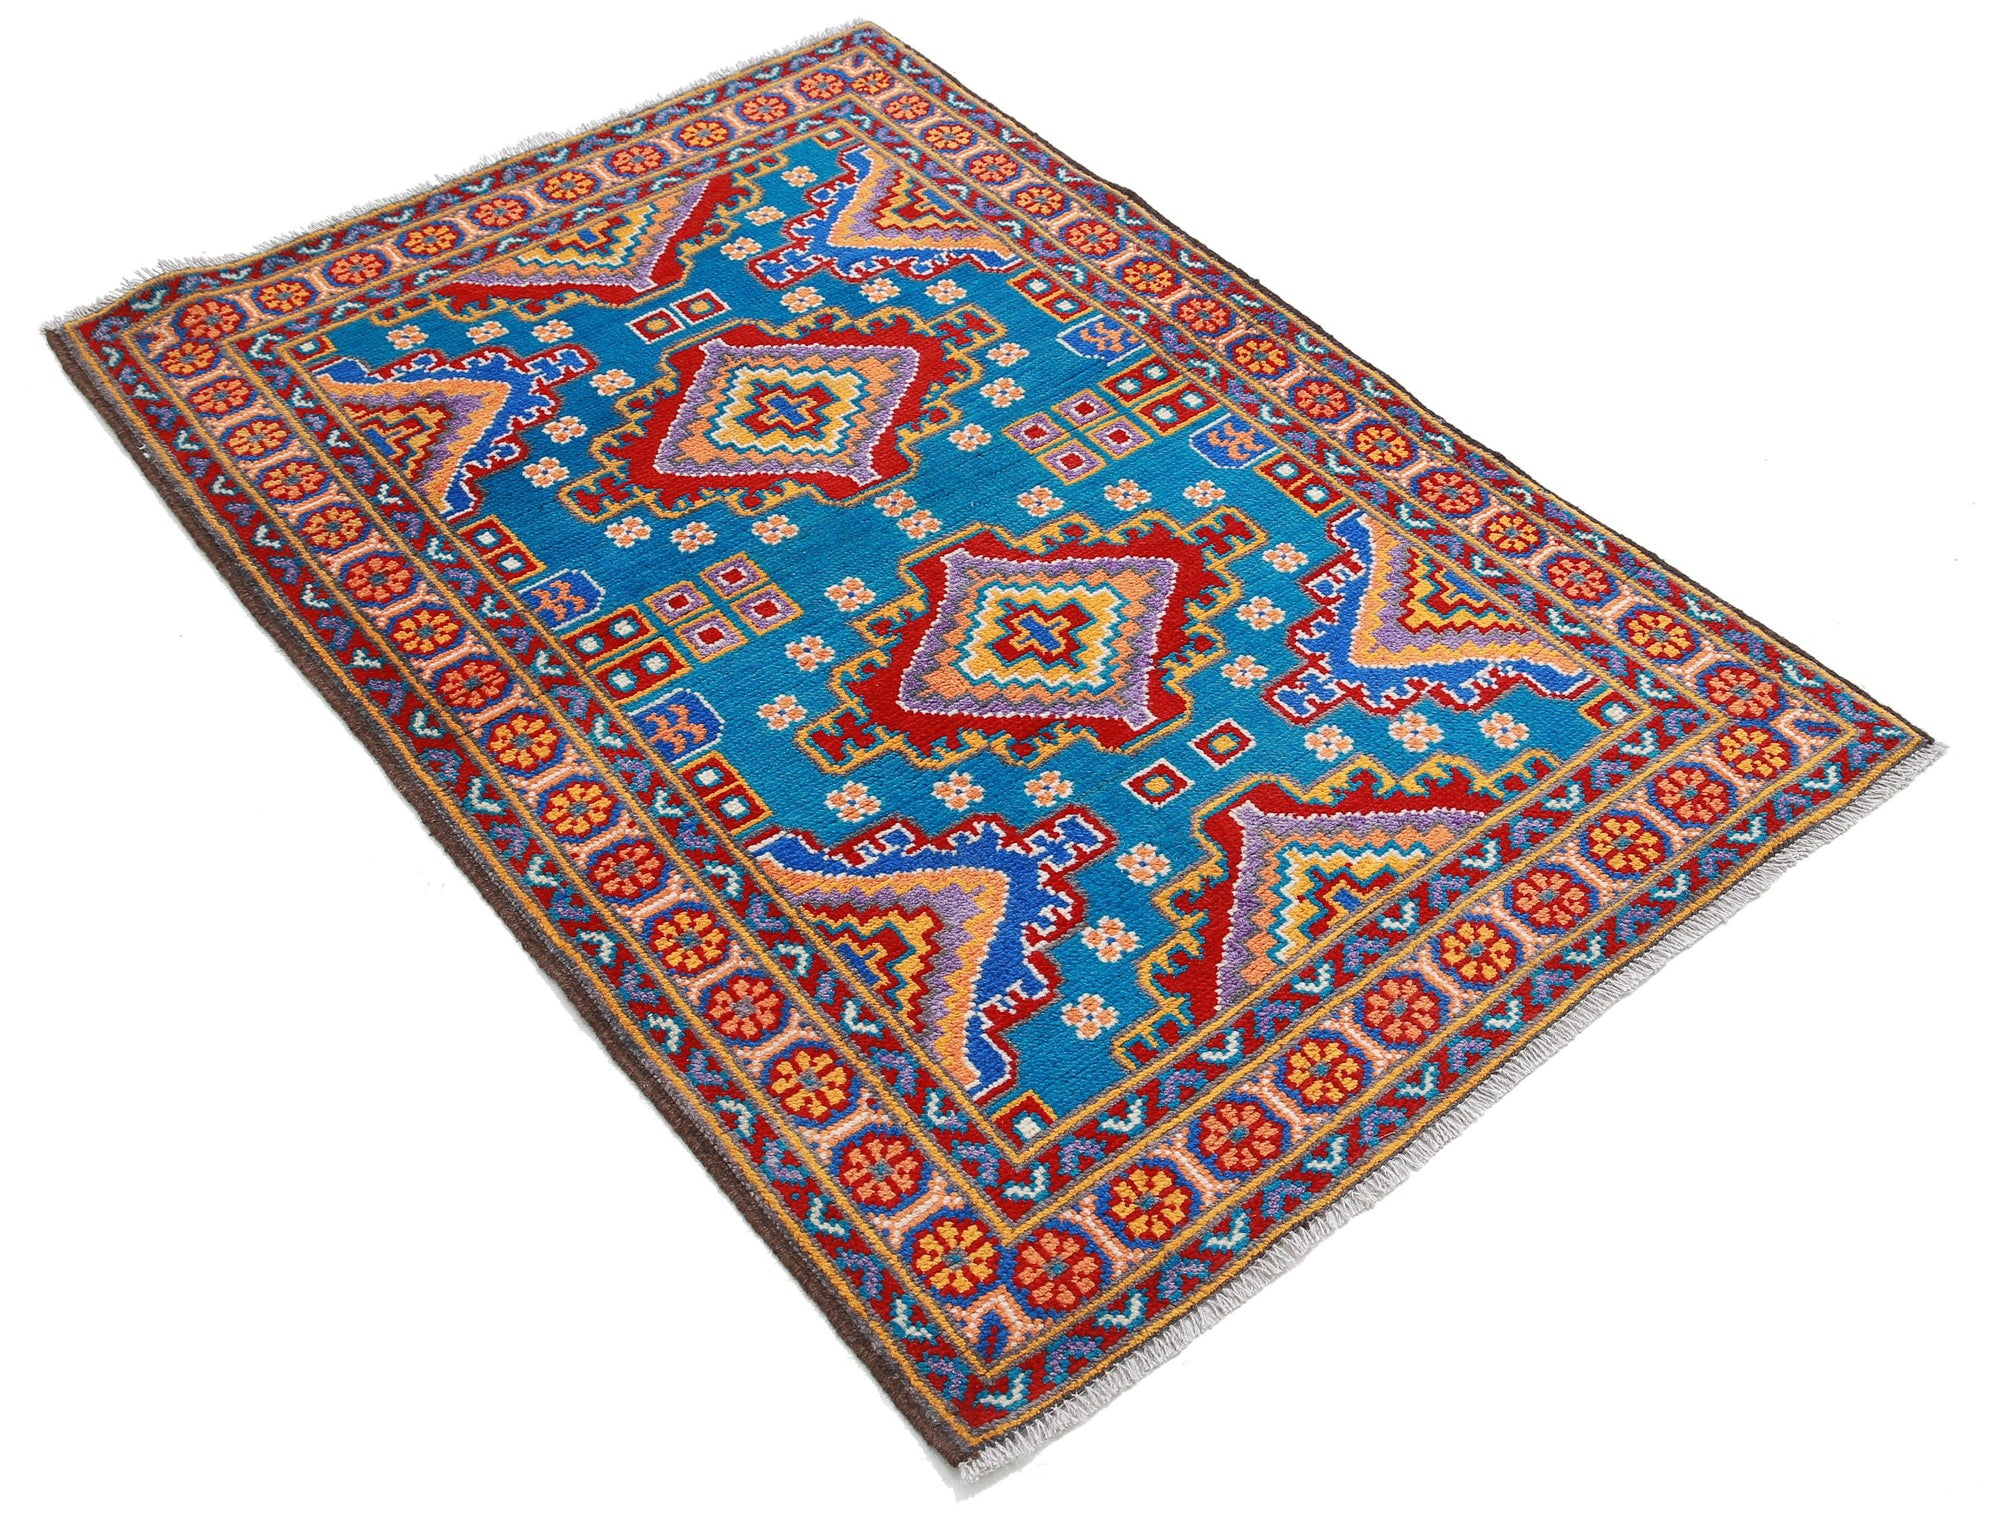 Revival-hand-knotted-qarghani-wool-rug-5014204-1.jpg